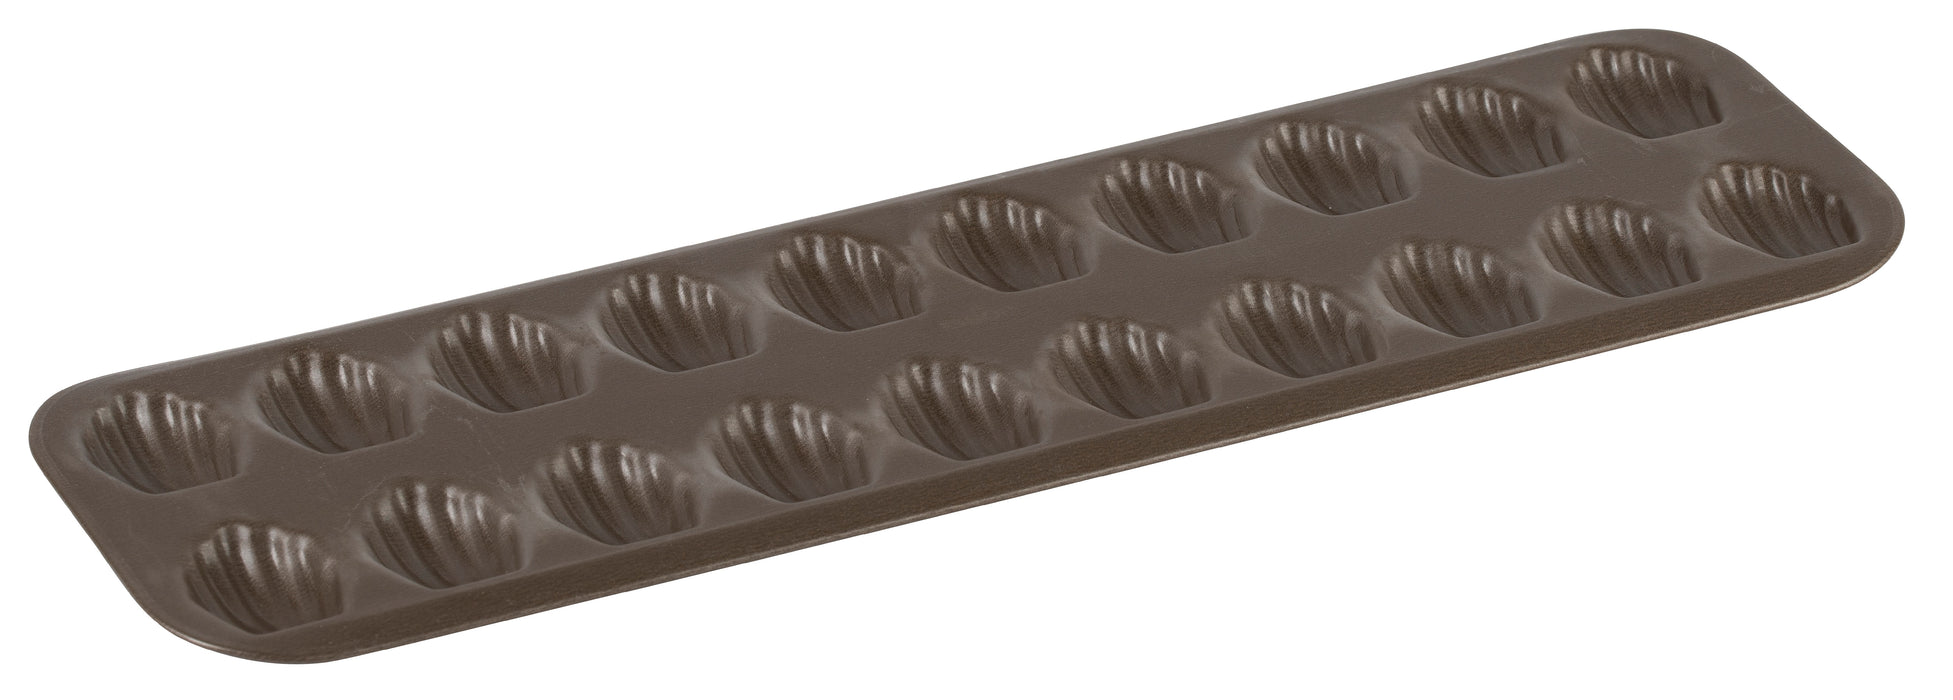 Louis Tellier 264710 Pastry Mold